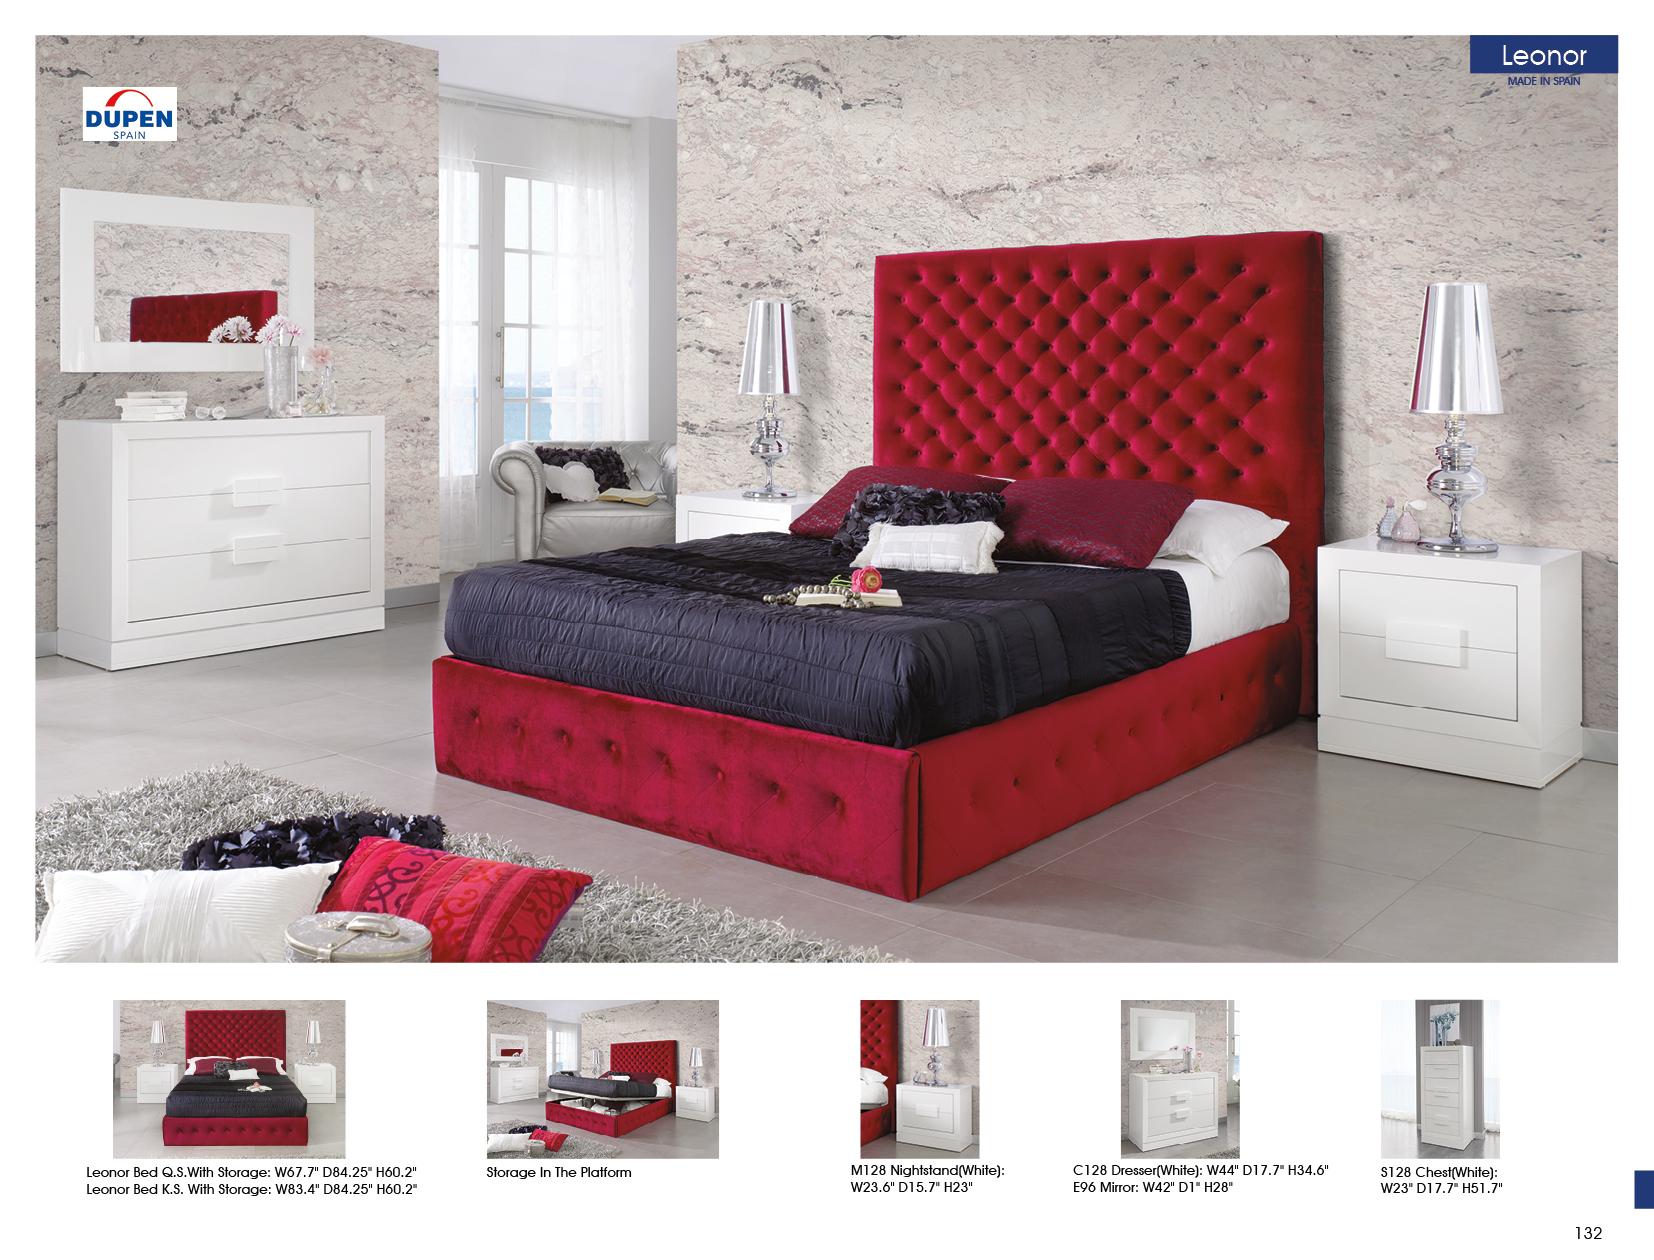 

    
Queen Storage Bedroom Set 6 Leonor Burgundy Contemporary Made in Spain ESF Dupen
